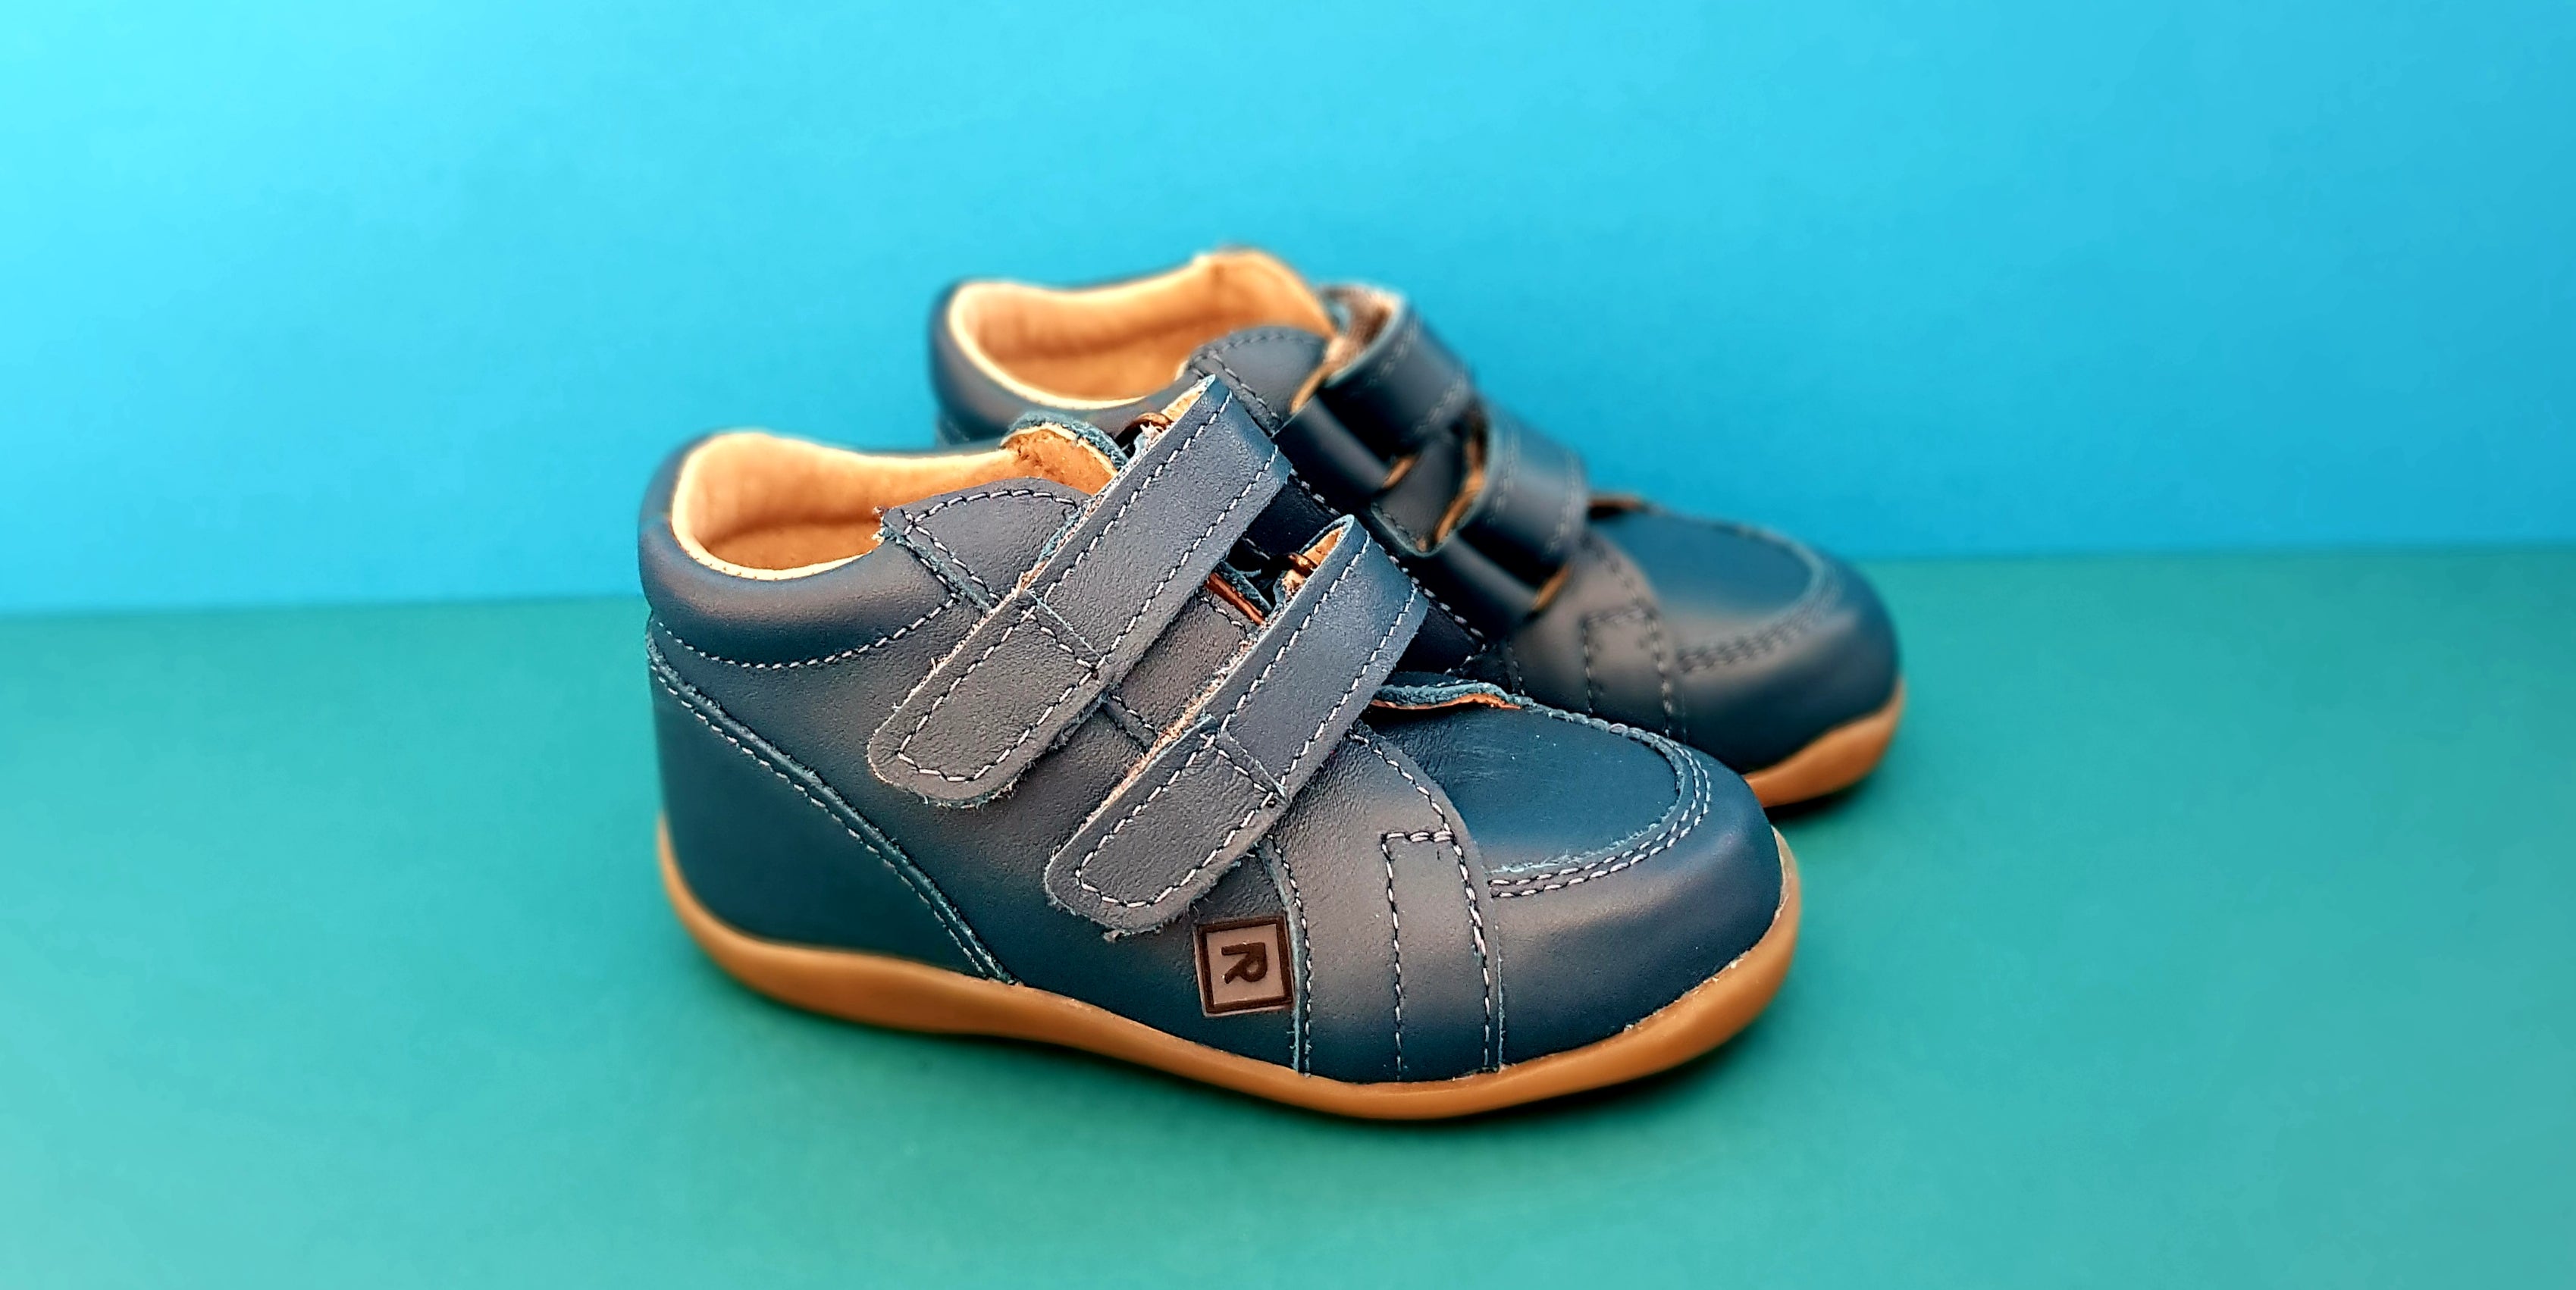 Dark Blue First Walking Shoes for Toddlers made from soft leather with hood-and-loop fastener